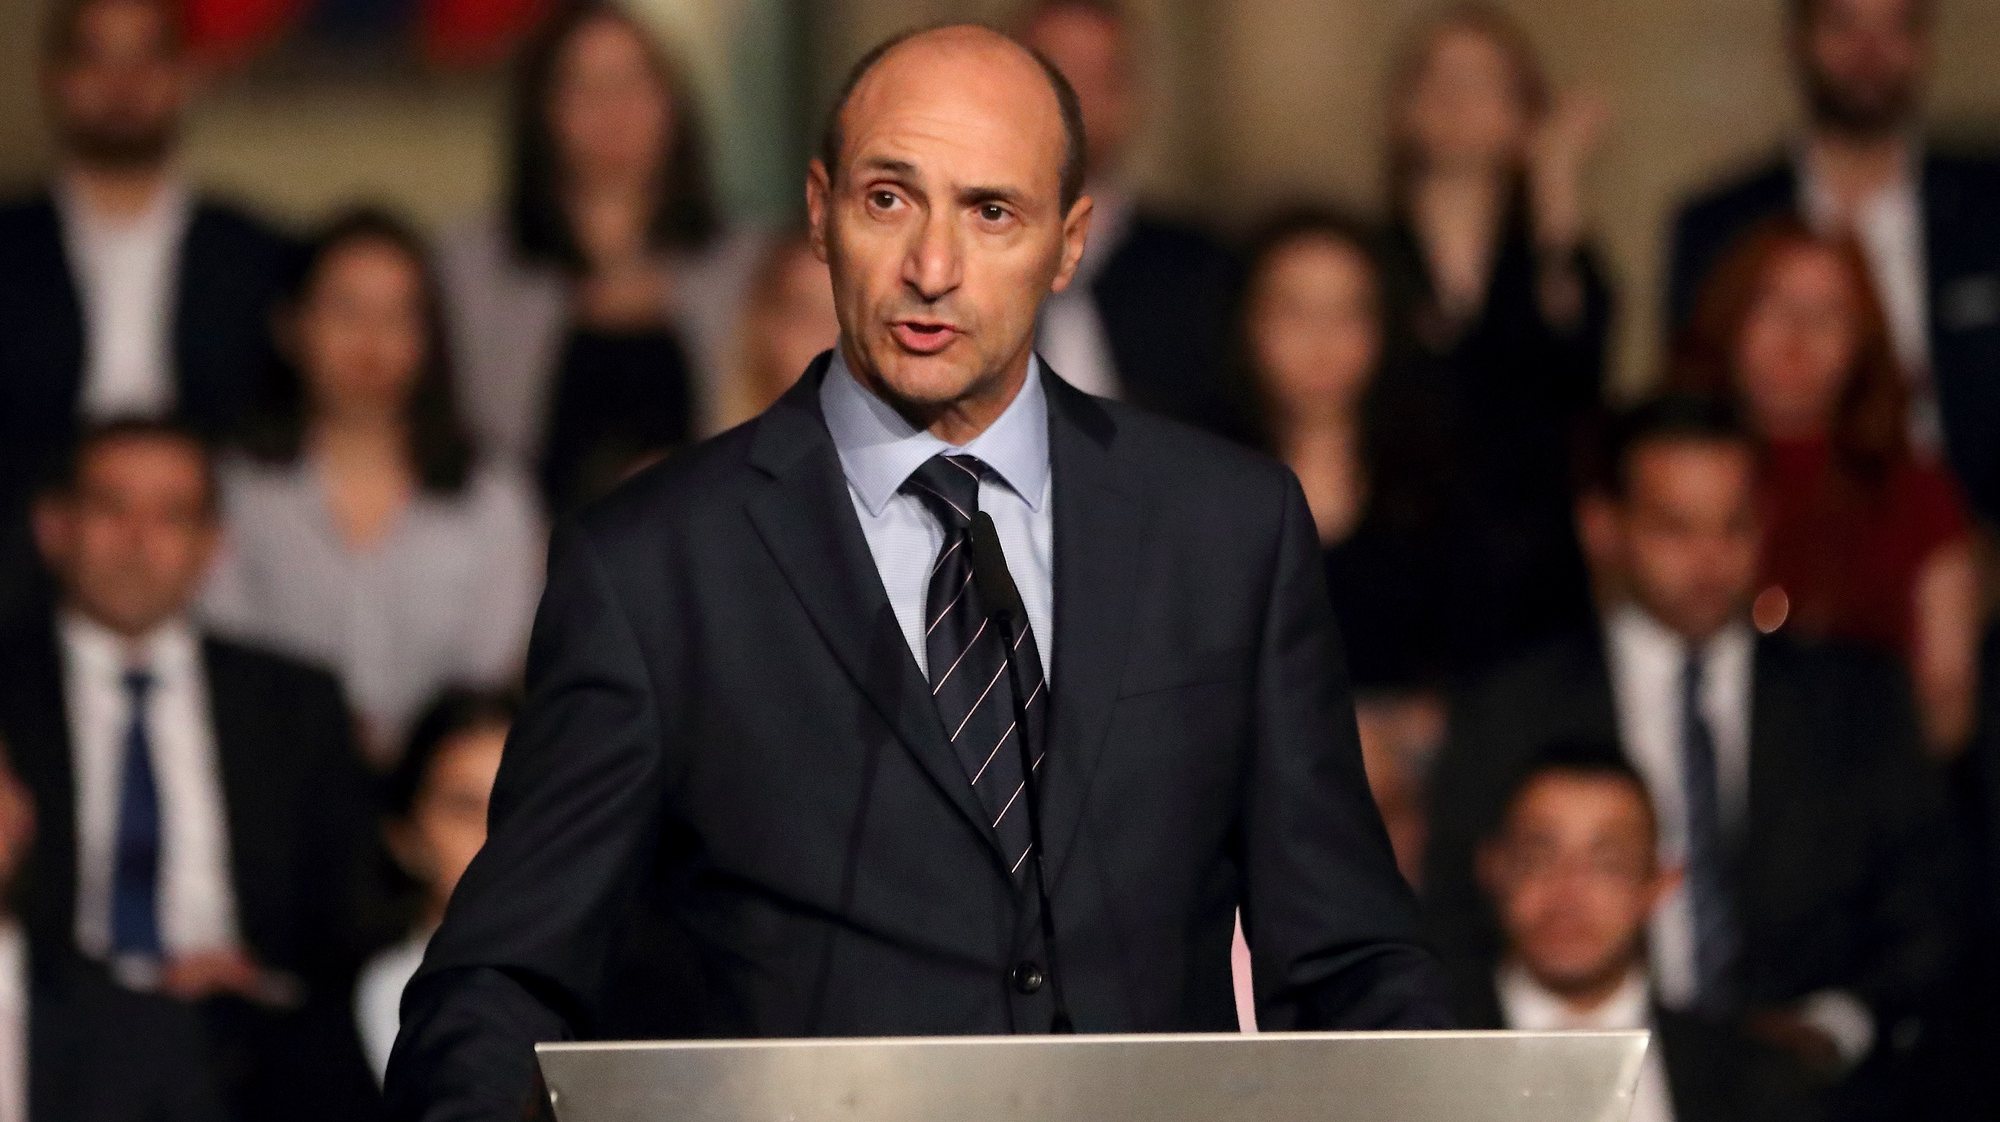 epa08049227 Malta&#039;s Deputy Prime Minister and Minister for Health, Dr. Chris Fearne speaks during a government event in Castille Place, Valletta, Malta, on 22 October, 2018 (issued 06 December 2019). Chris Fearne officially announced on 06 December 2019 that he will contest the upcoming Labour leadership (Partit Laburista) election. According to local reports, Fearner is tipped to succeed Joseph Muscat as the next Prime Minister of Malta.  EPA/DOMENIC AQUILINA